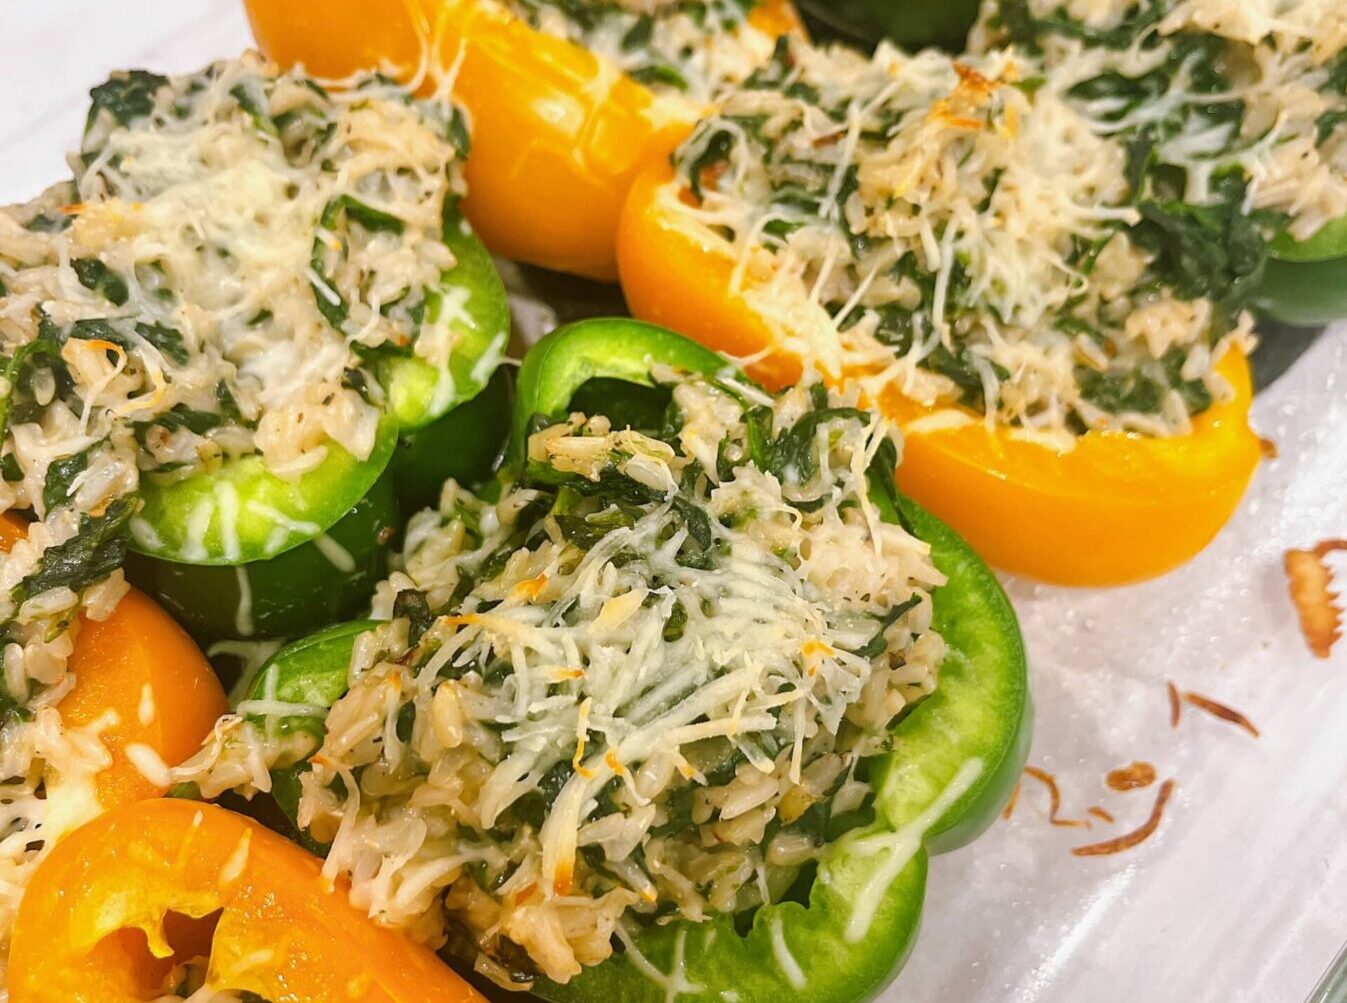 Cheesy Spinach Stuffed Peppers